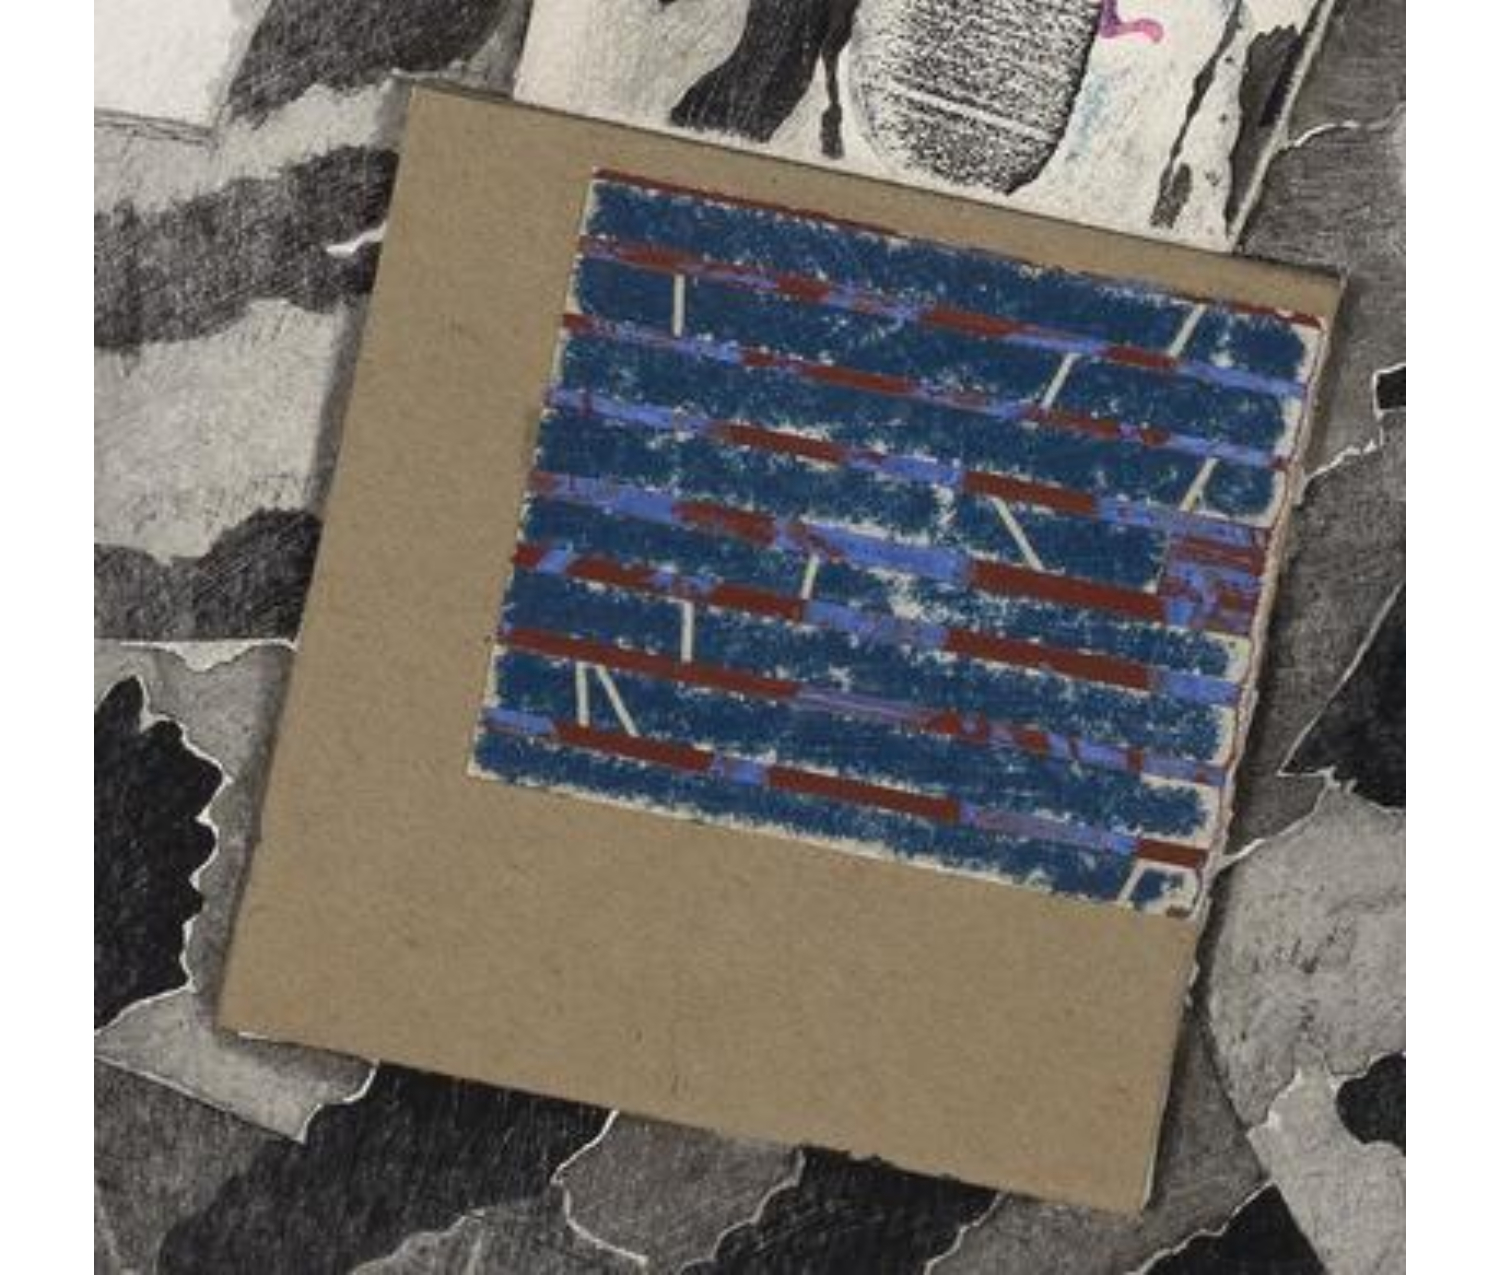 Detail of ‘The Pink Collage’: crooked brown square on mottled gray background. A striped blue square sits in the corner of the brown square.